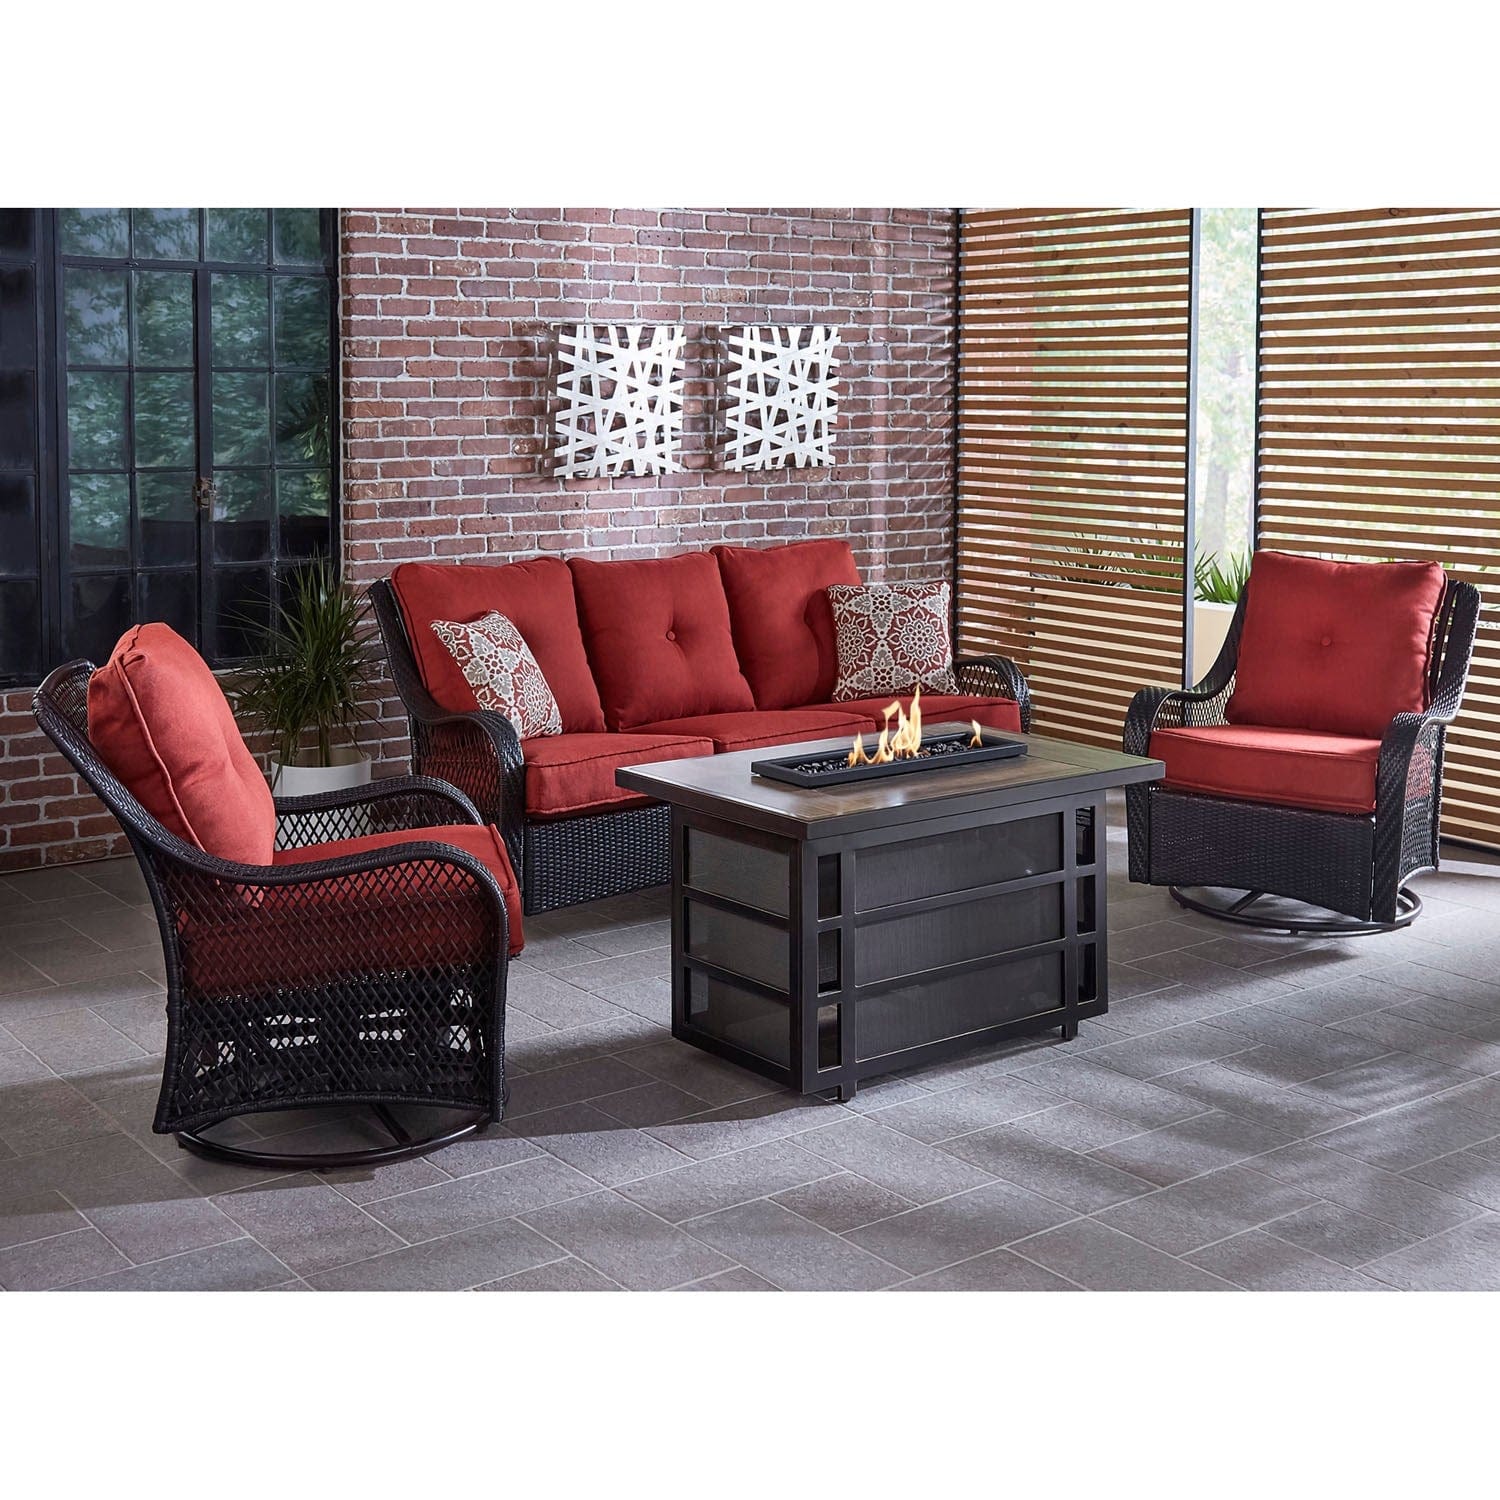 Hanover Fire Pit Chat Set Hanover Orleans 4-Piece Woven Lounge Set with 30,000 BTU Fire Pit Table in Autumn Berry, ORL4PCRECFP-BRY